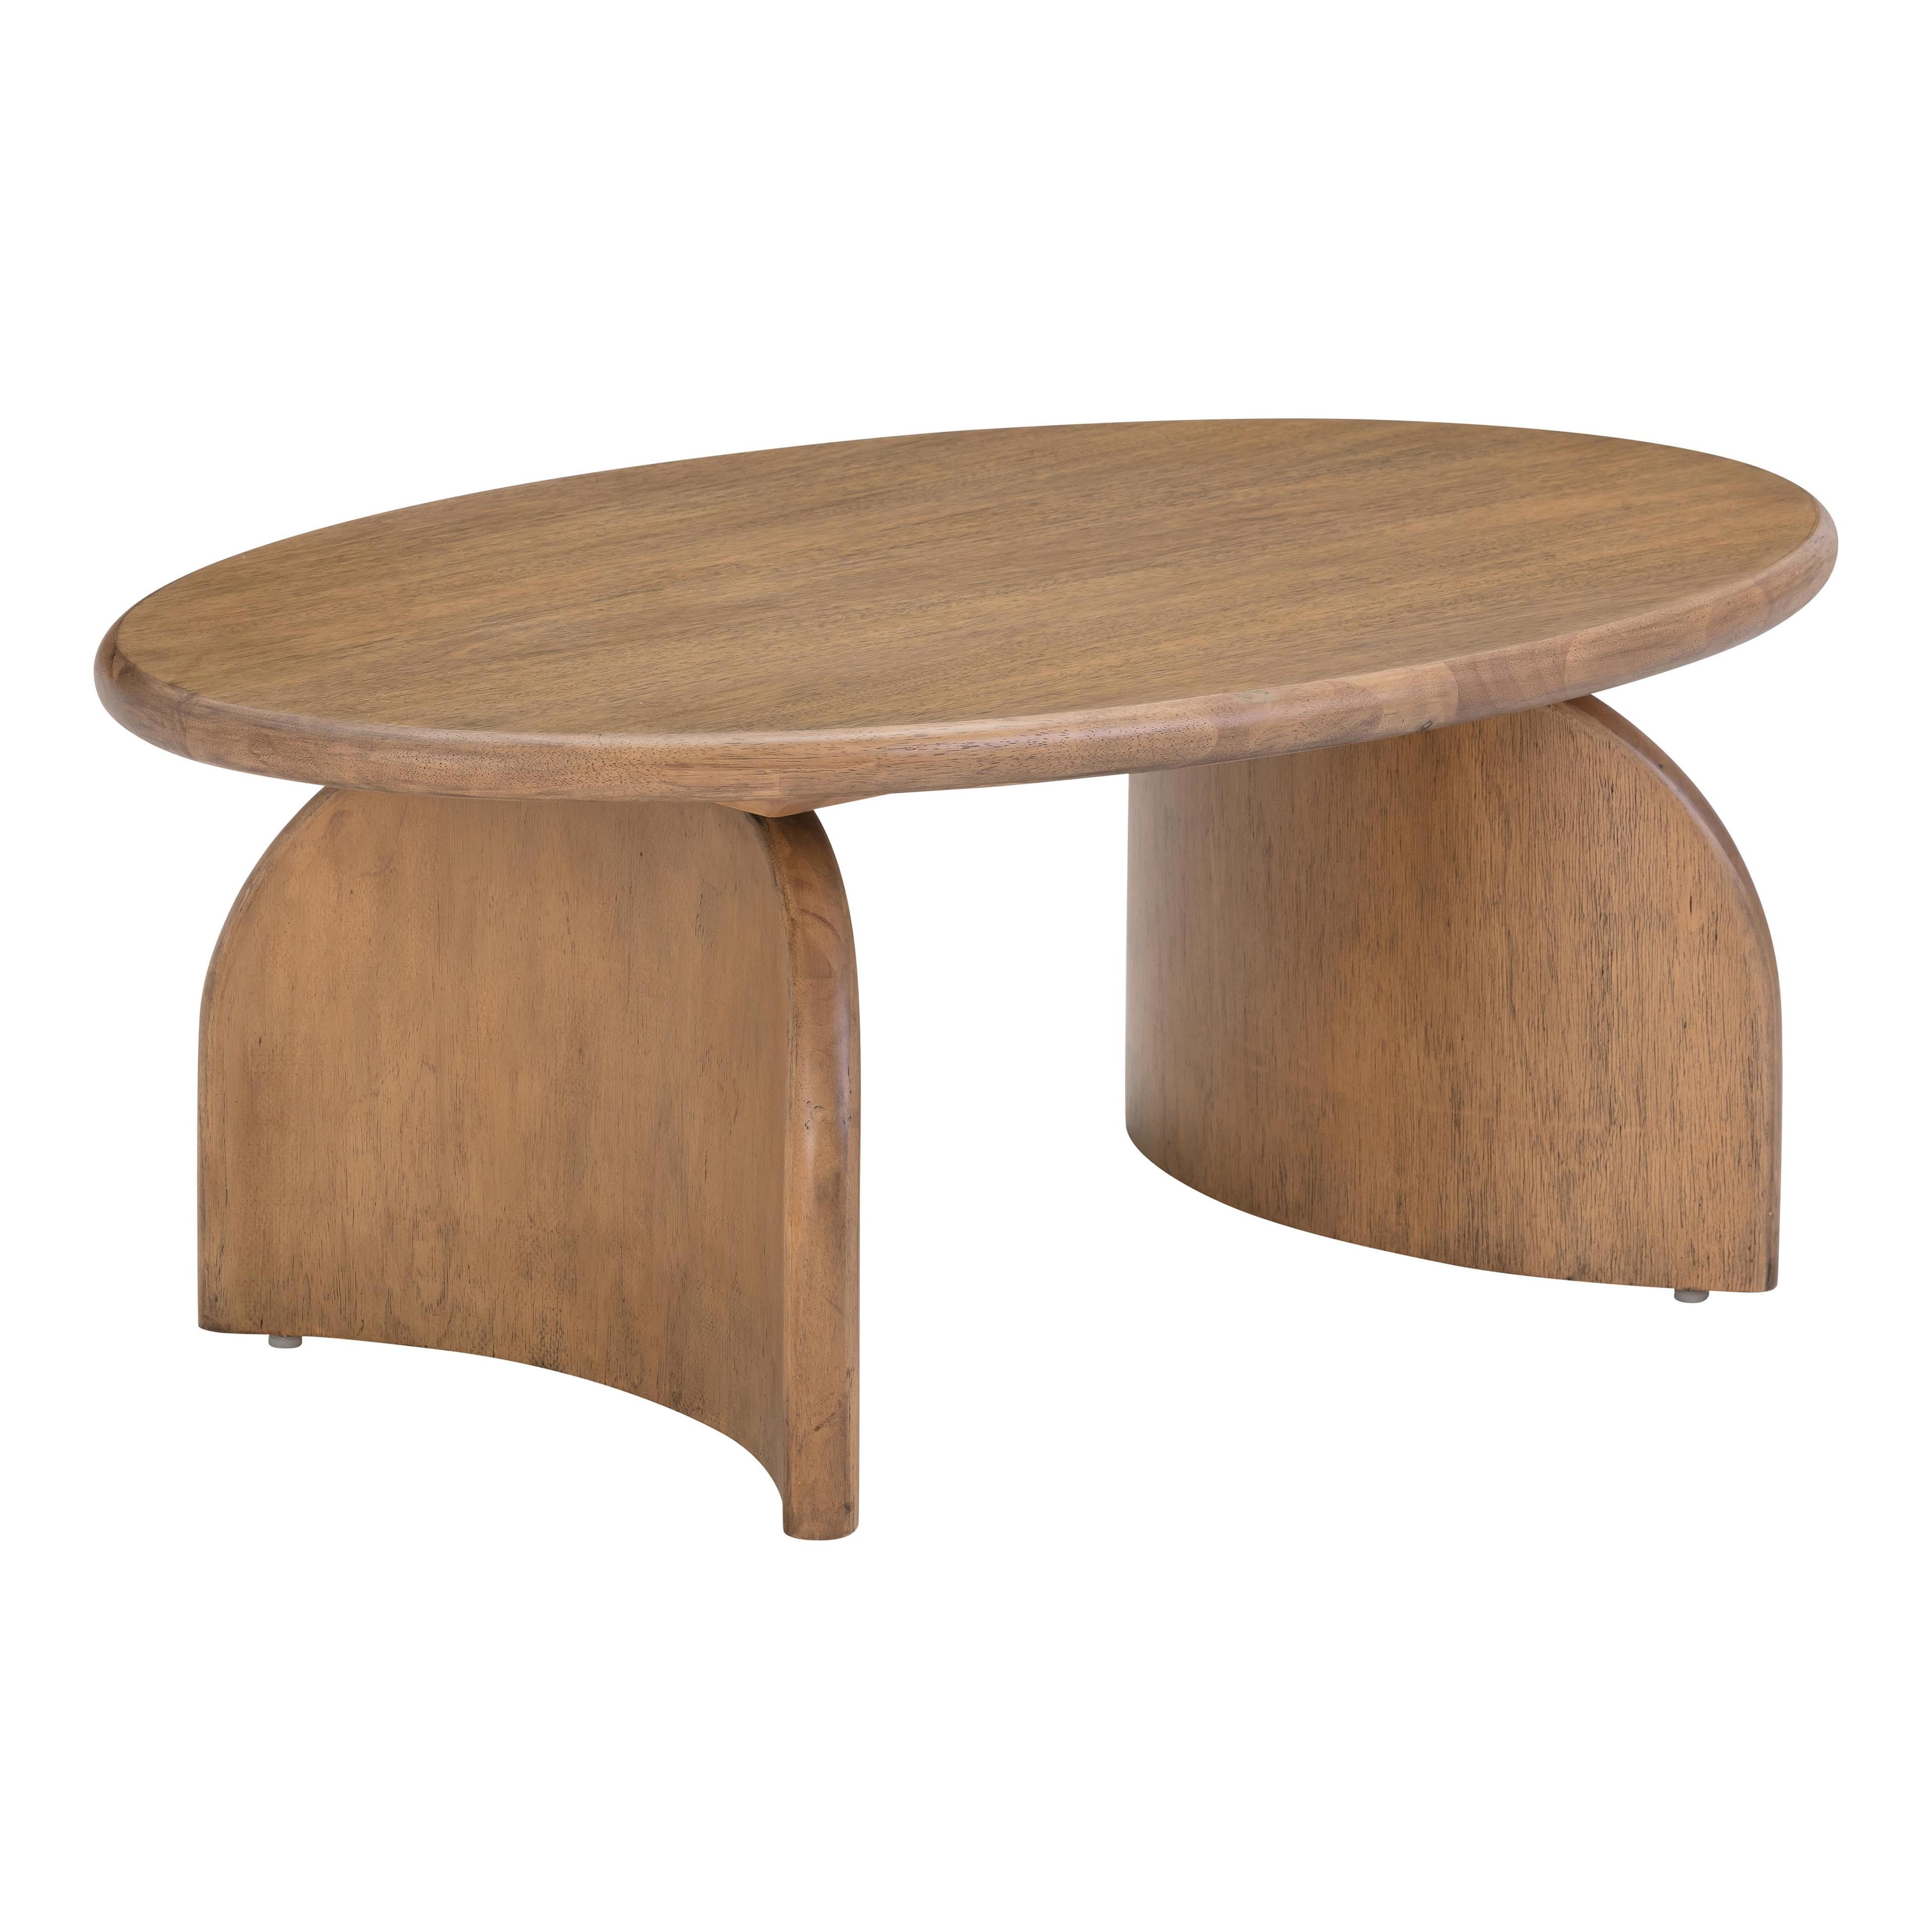 Contemporary Sofia Cognac Oval Wooden Outdoor Coffee Table with Storage